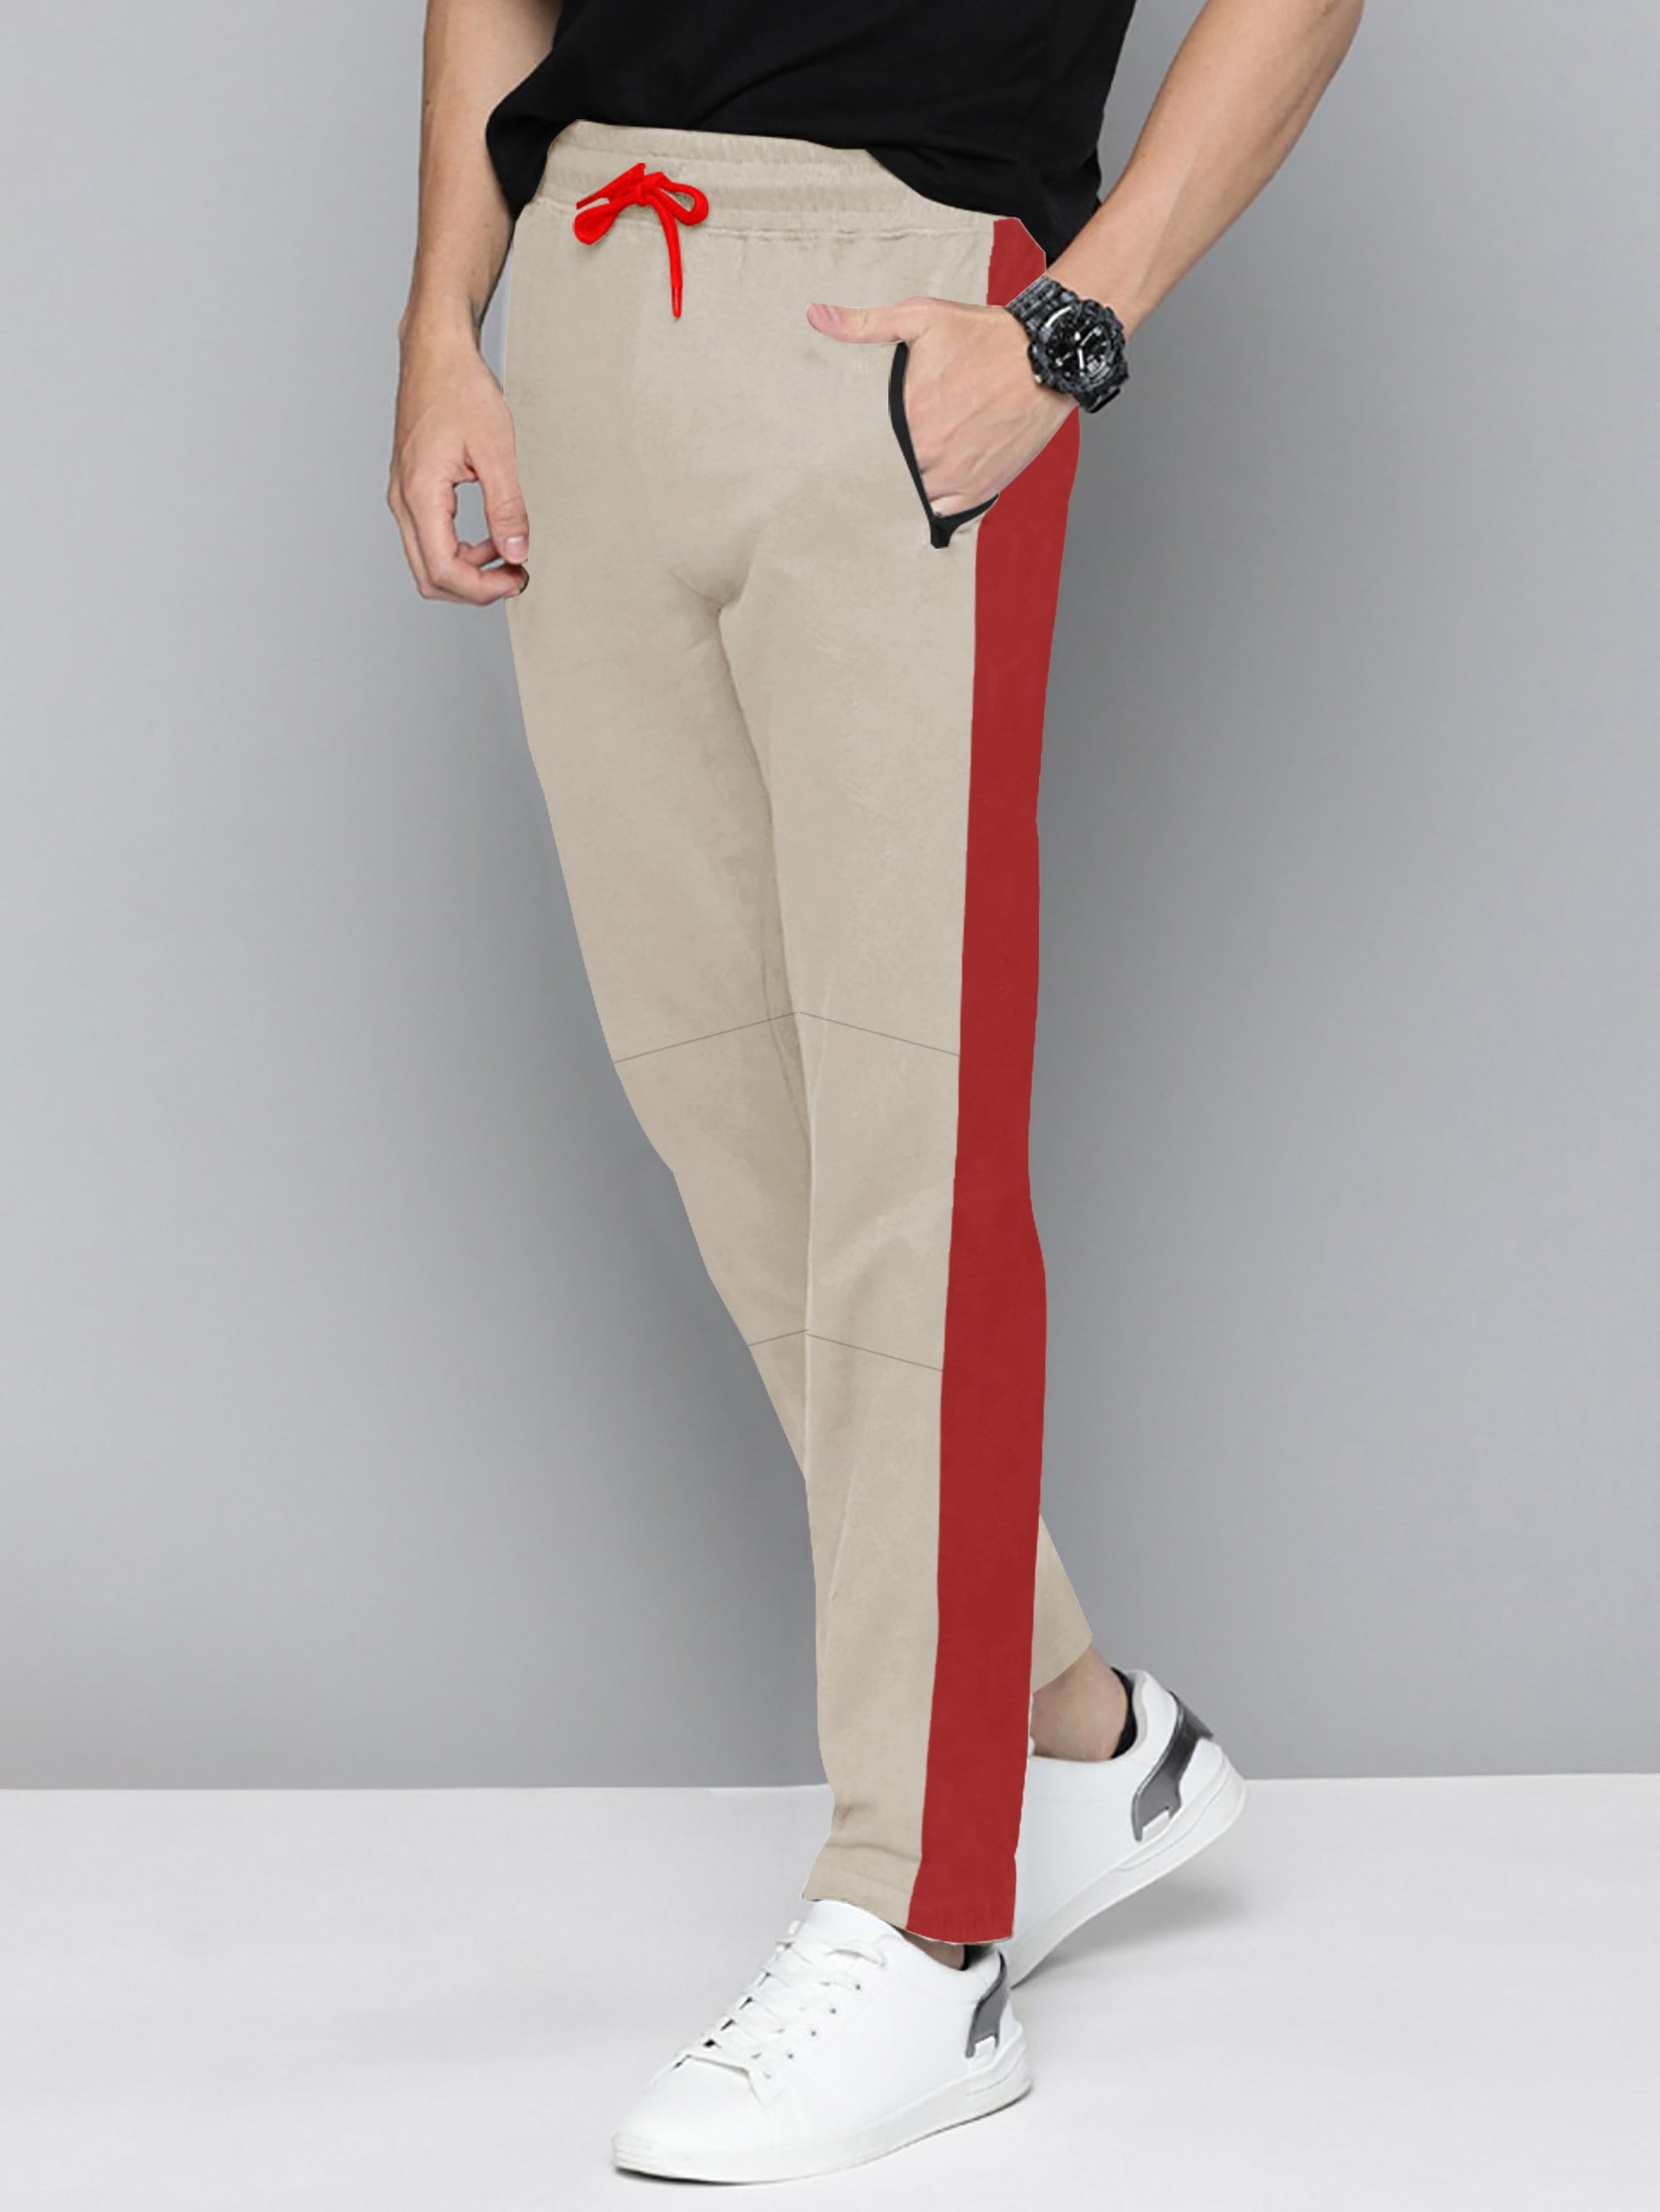 Summer Single Jersey Slim Fit Trouser For Men-Wheat With Red Stripe-SP124/RT2095